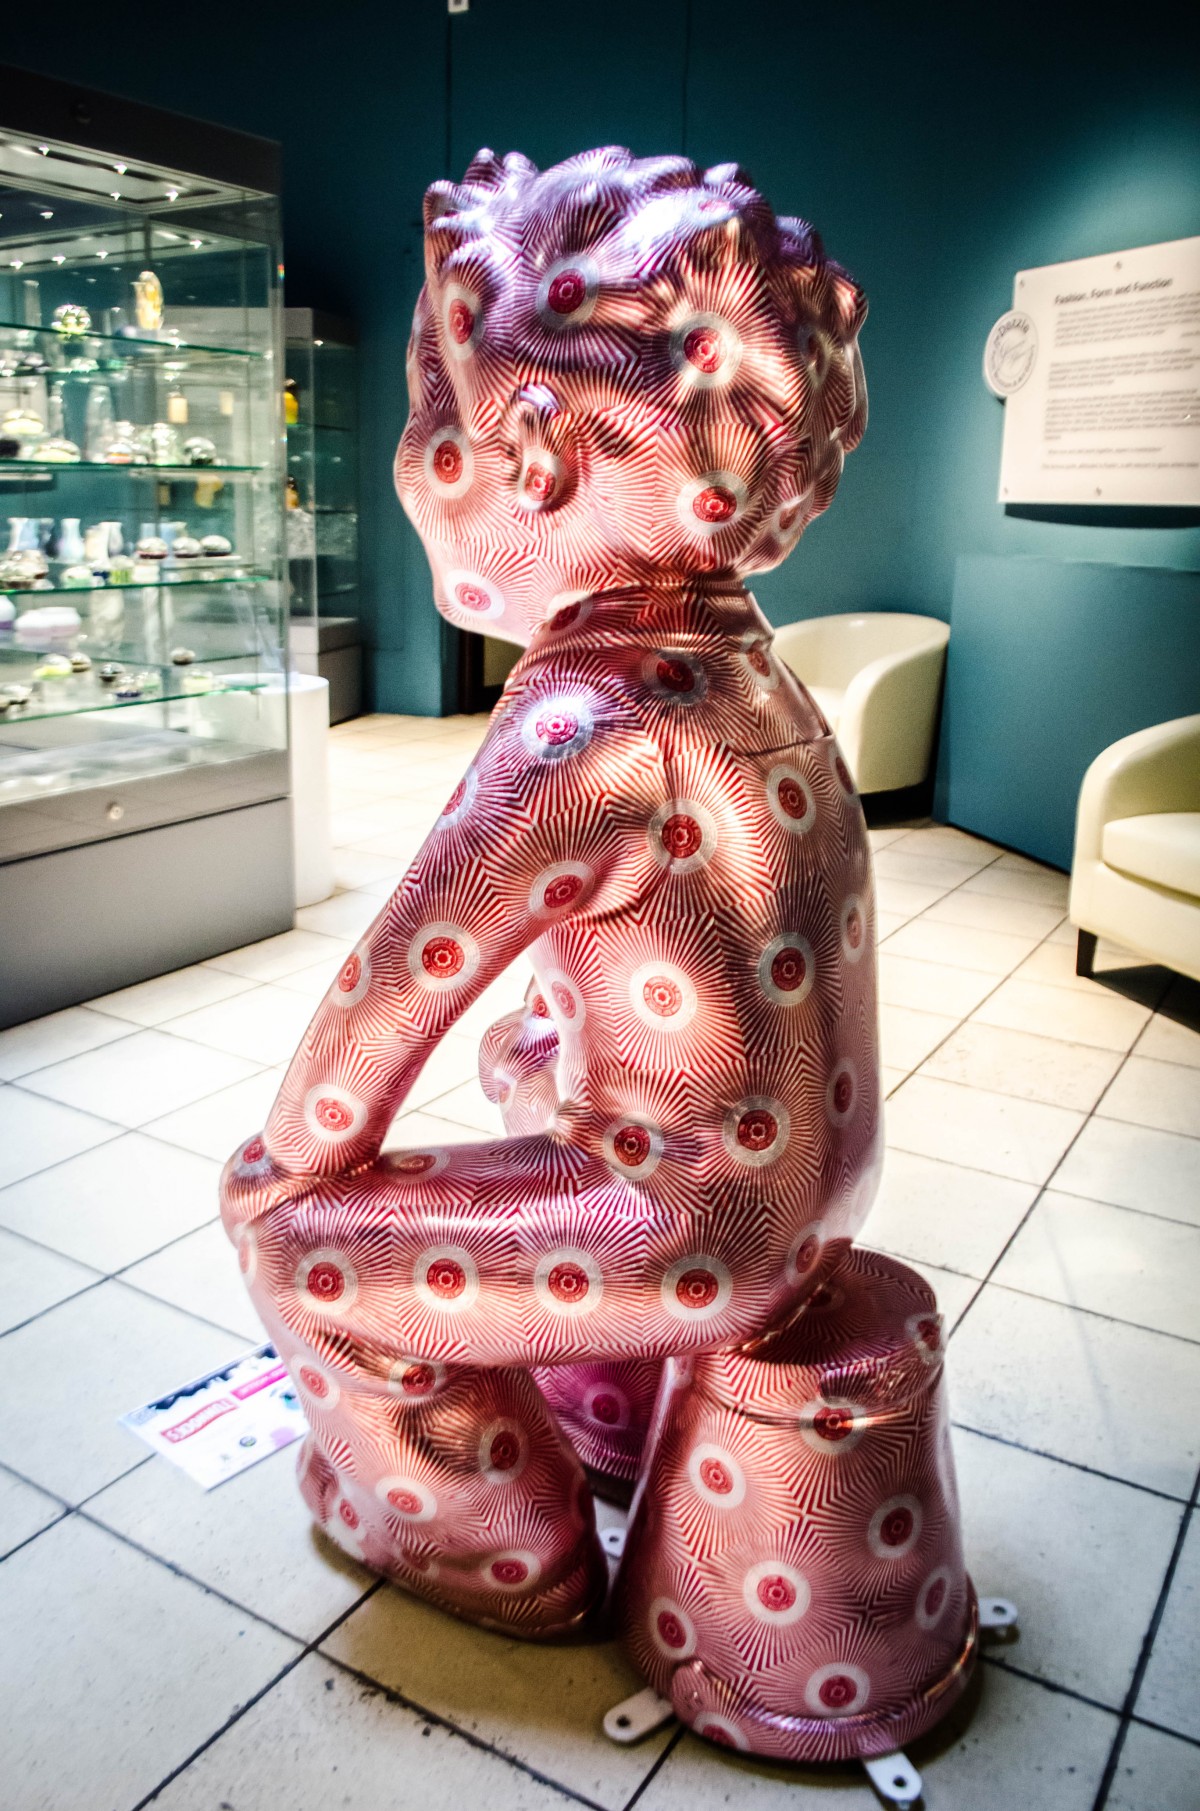 This Oor Wullie by Robert Mach looks like it is glowing as it sits in Perth Museum and Art Gallery.  The shiny Tunnocks Tea Cake wrappers that it's guilded in make it appear illuminated.